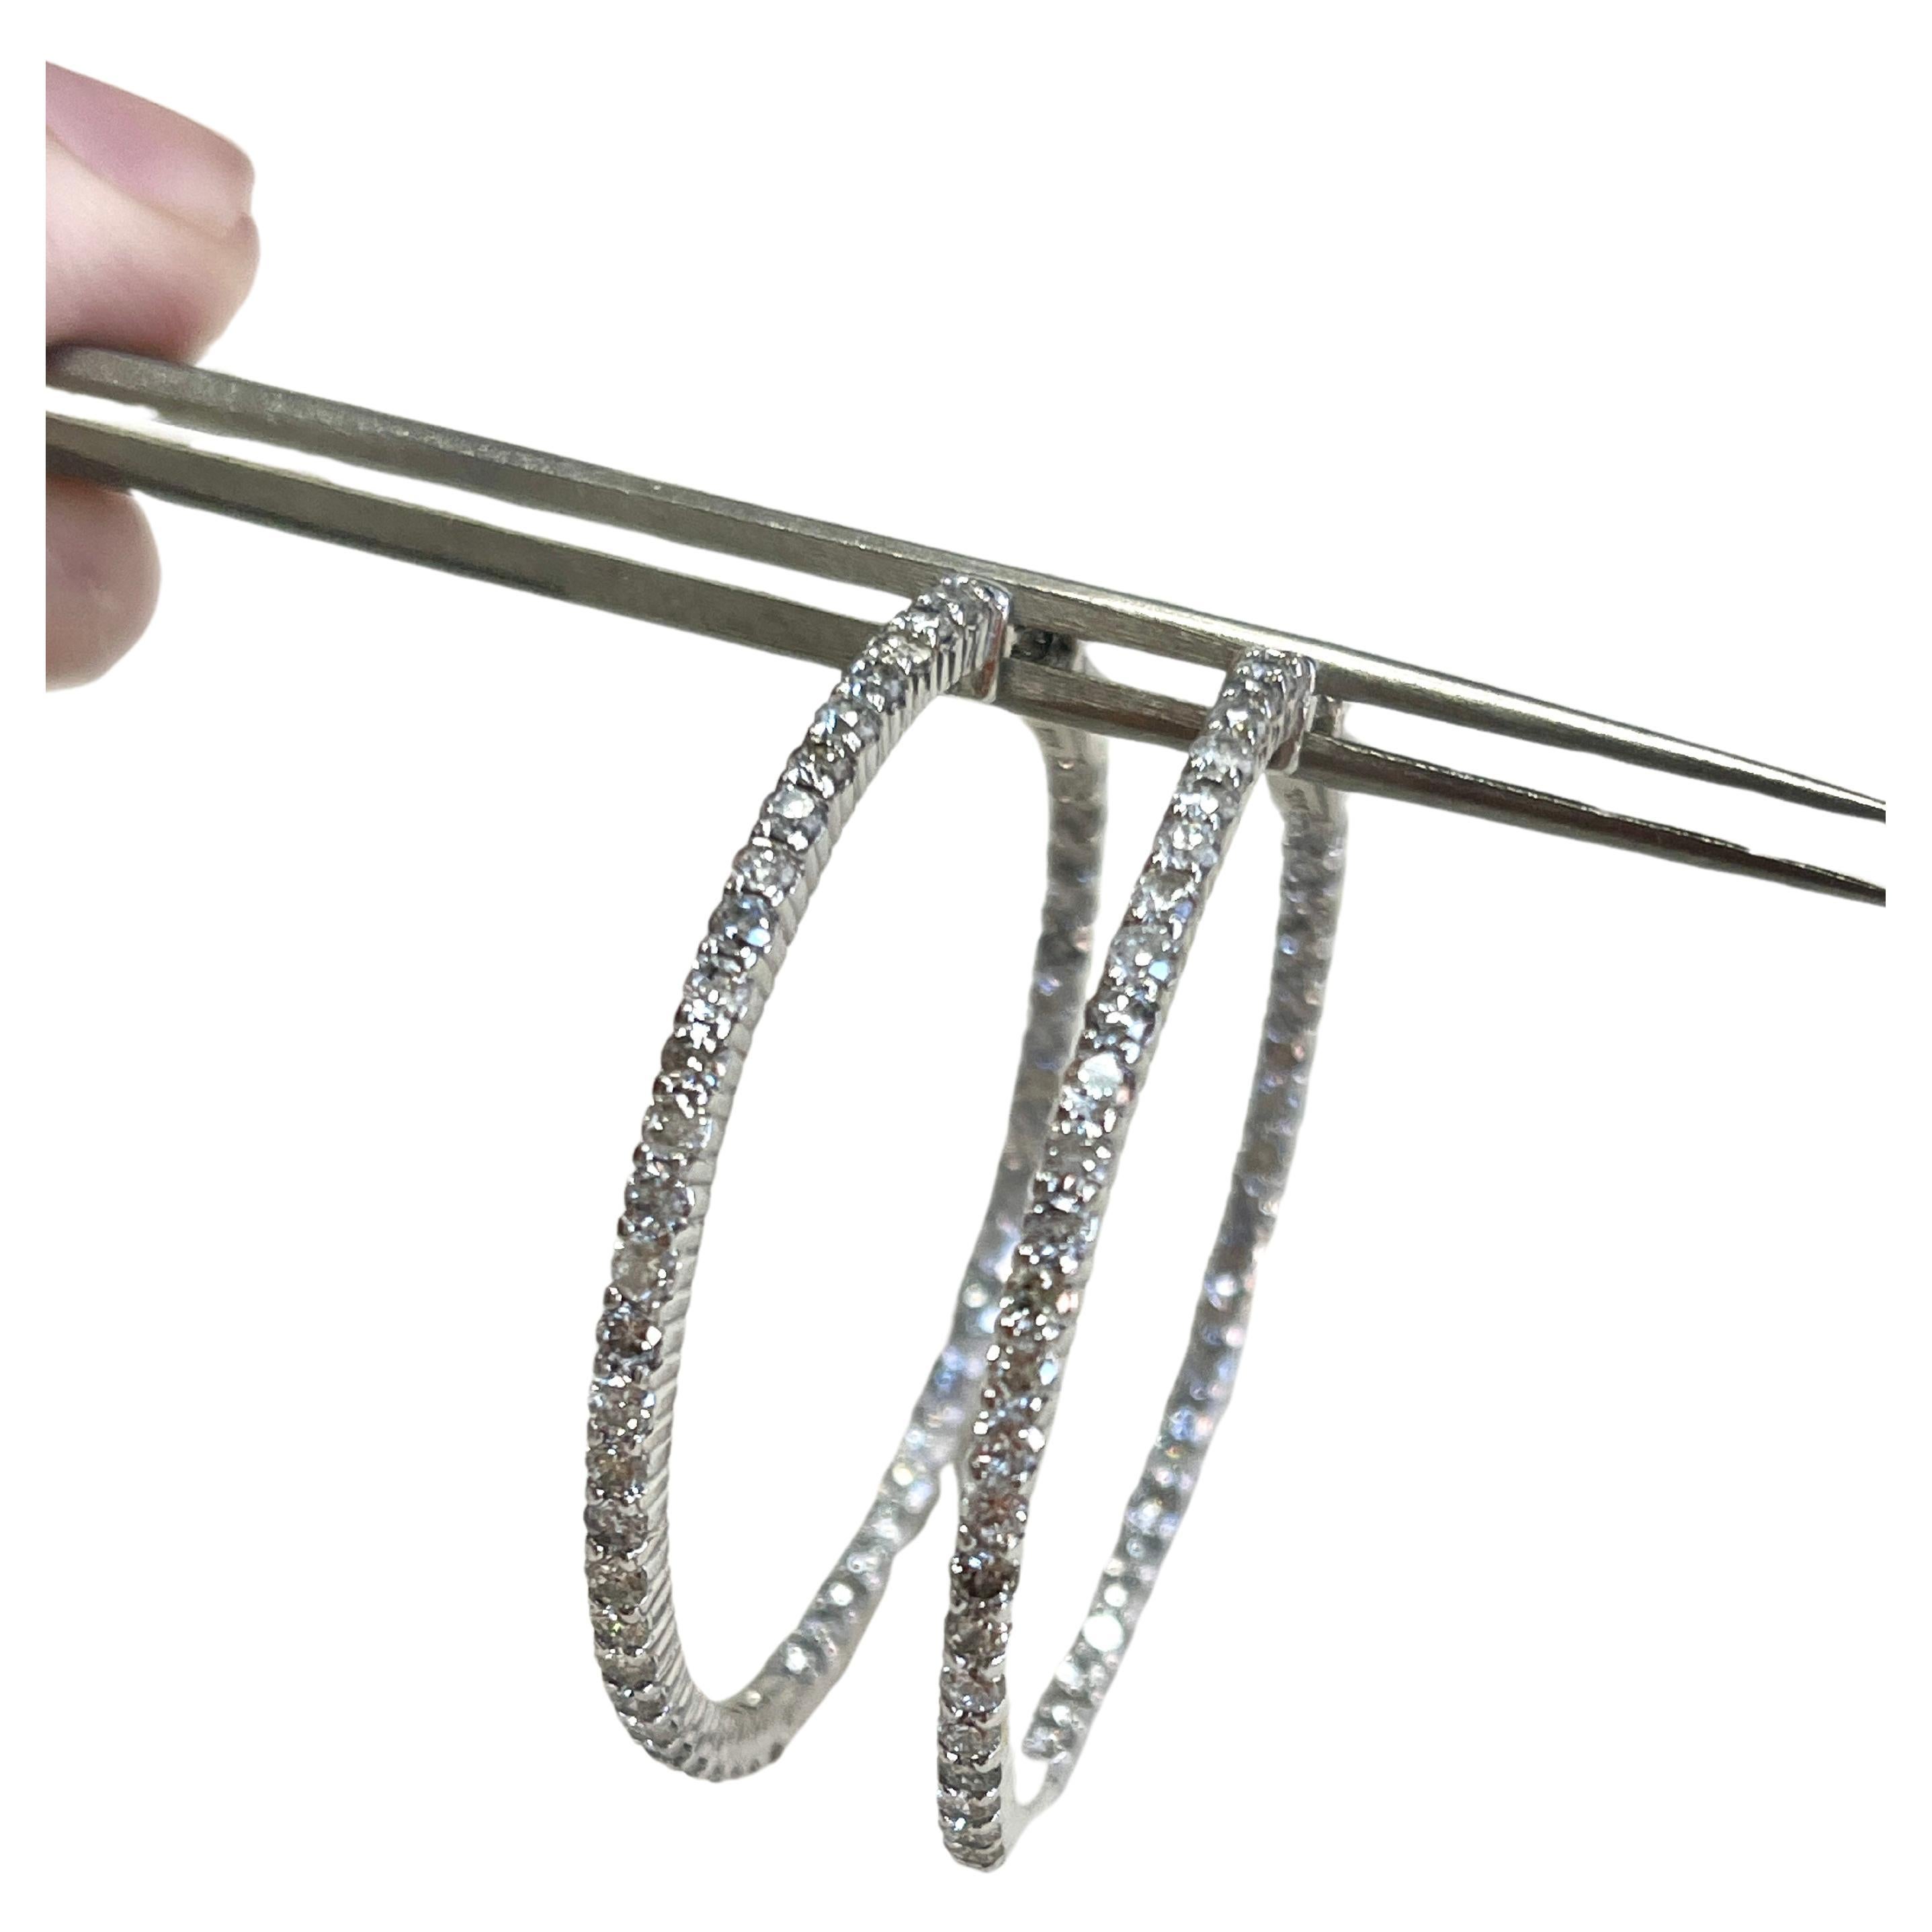 Beautiful pair of diamond hoop earrings in 14k white gold. Secures with snap closure for wear. Elegance for every moment. Inside out style 100 pieces Natural Diamonds
Average Color G, Clarity  I 
Measures 1.70 inch diameter.  10.94 grams

*Free